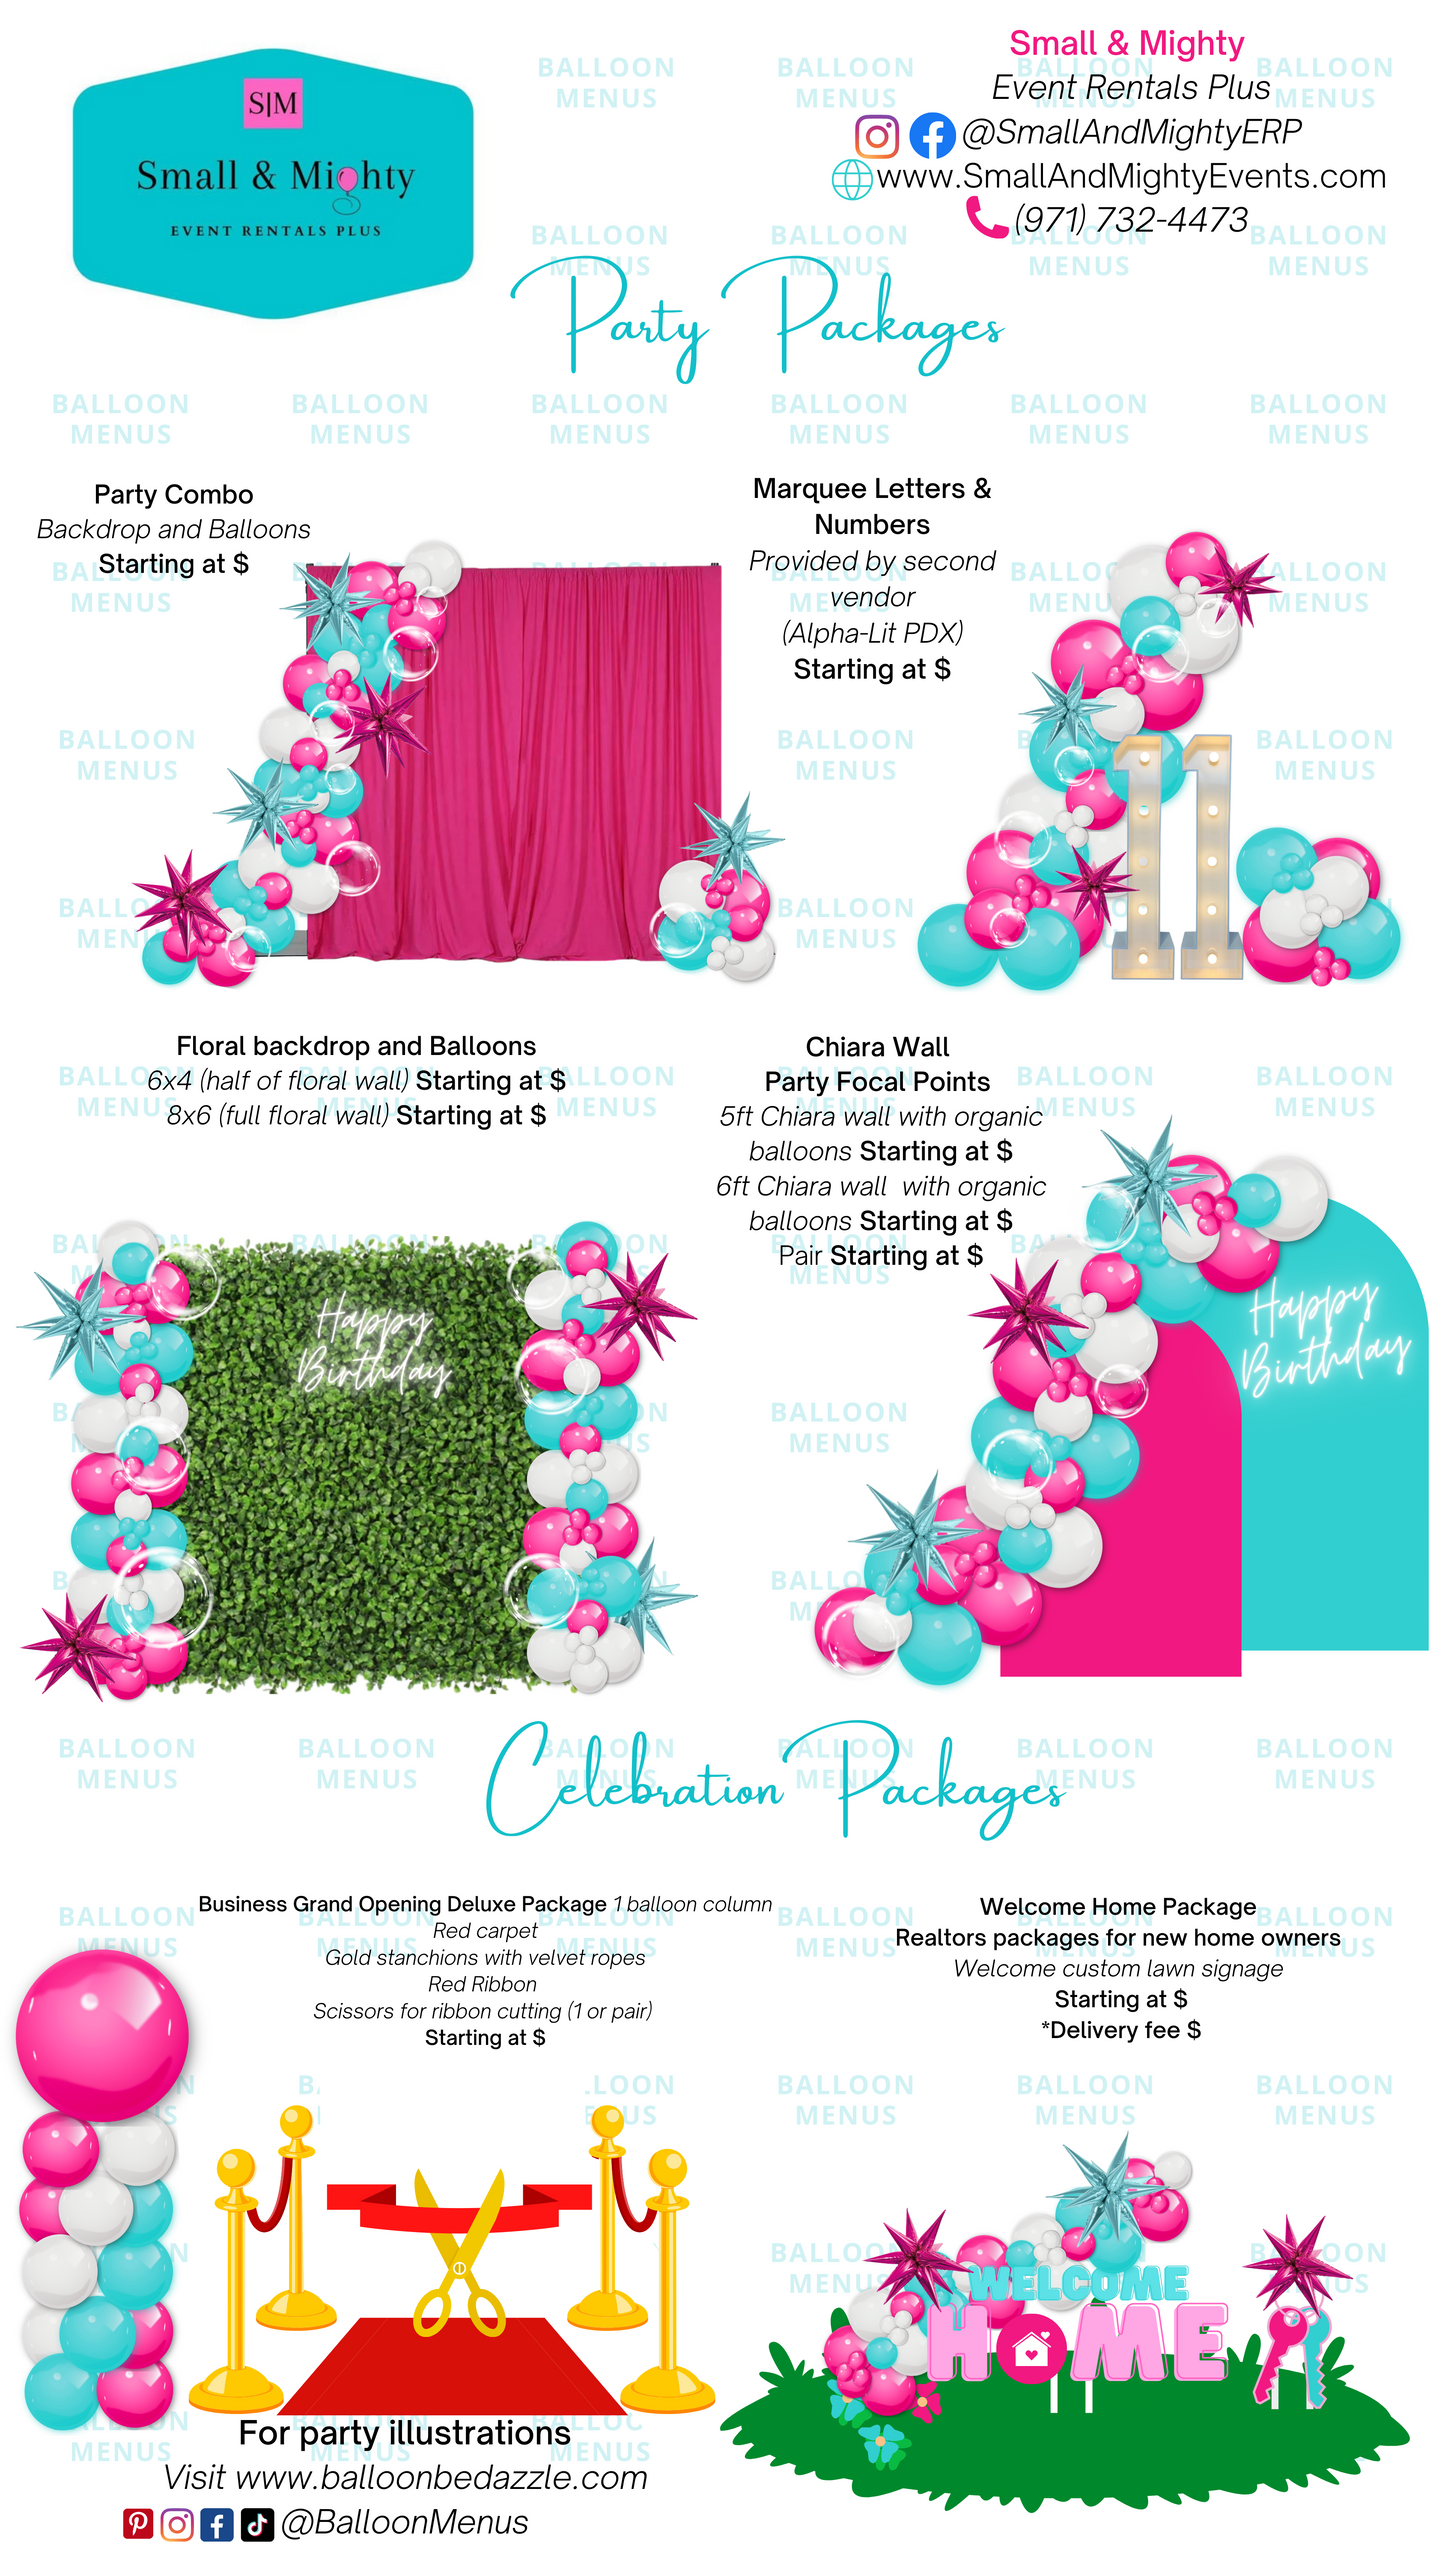 Small & Mighty Event Rentals Plus - Client Balloon Menu